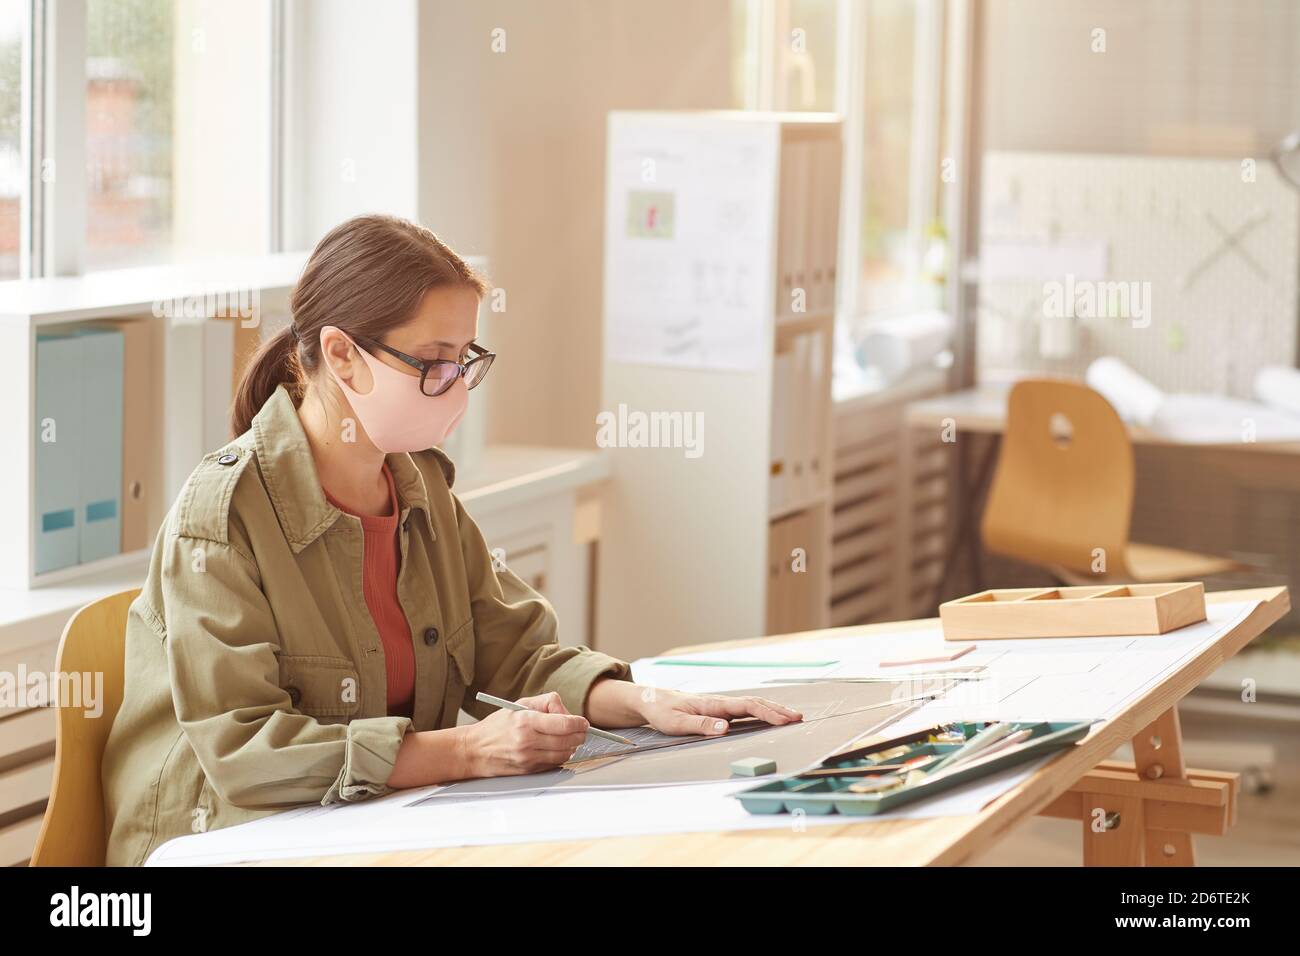 Side view portrait of female architect wearing mask while sitting at drawing desk in sunlight, copy space Stock Photo